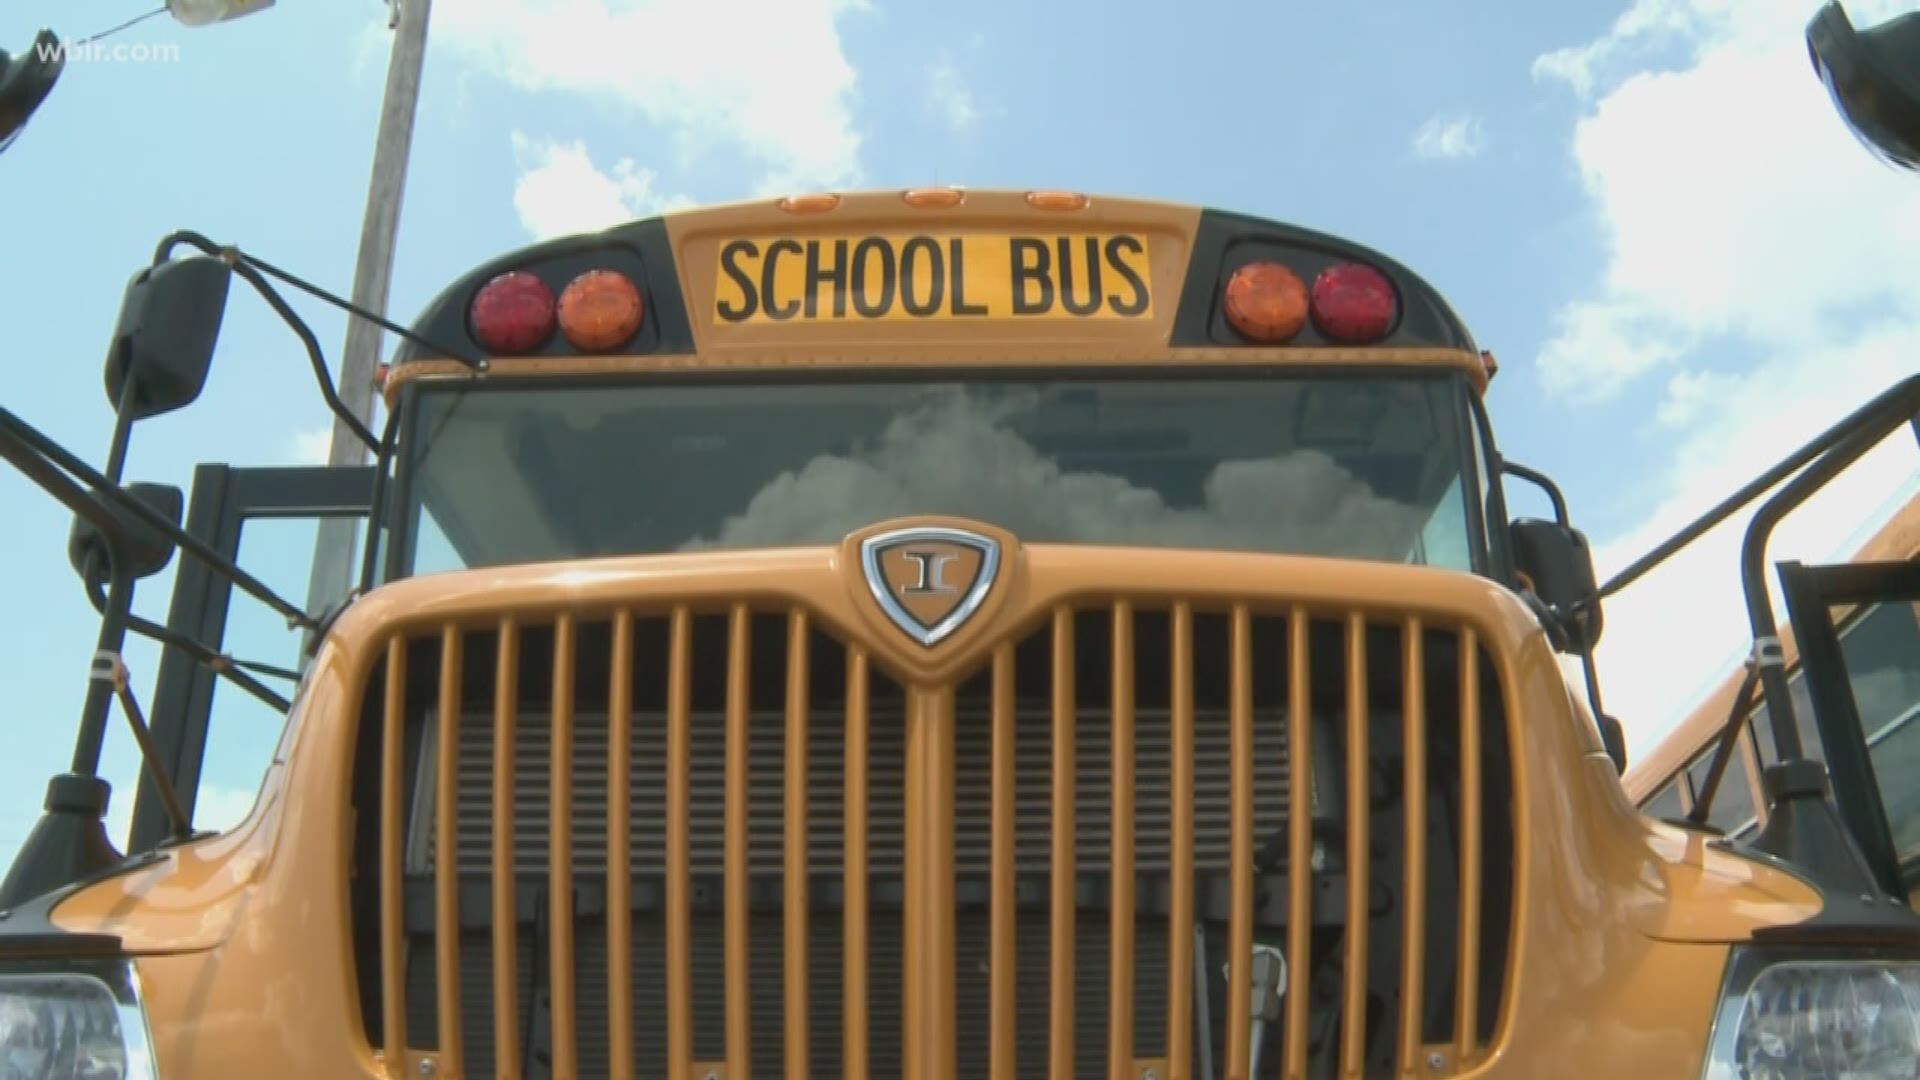 A new app lets parents track school buses in Knox County to monitor when kids will arrive and depart.